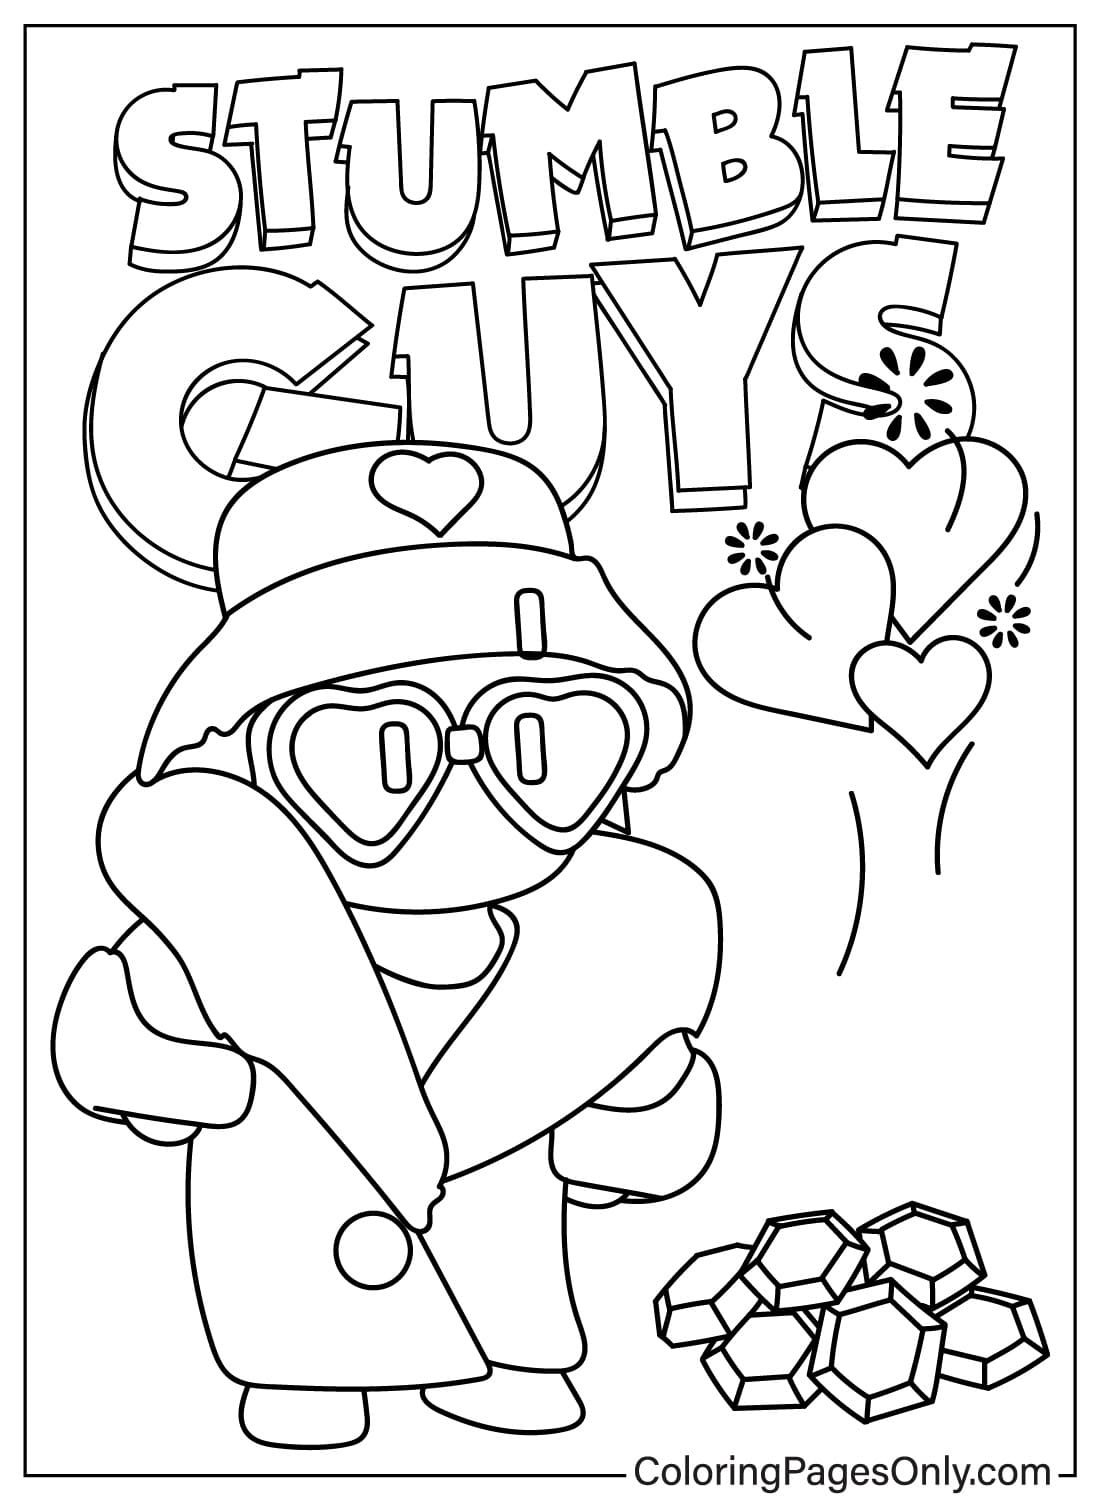 Drawing Stumble Guys Coloring Page - Free Printable Coloring Pages